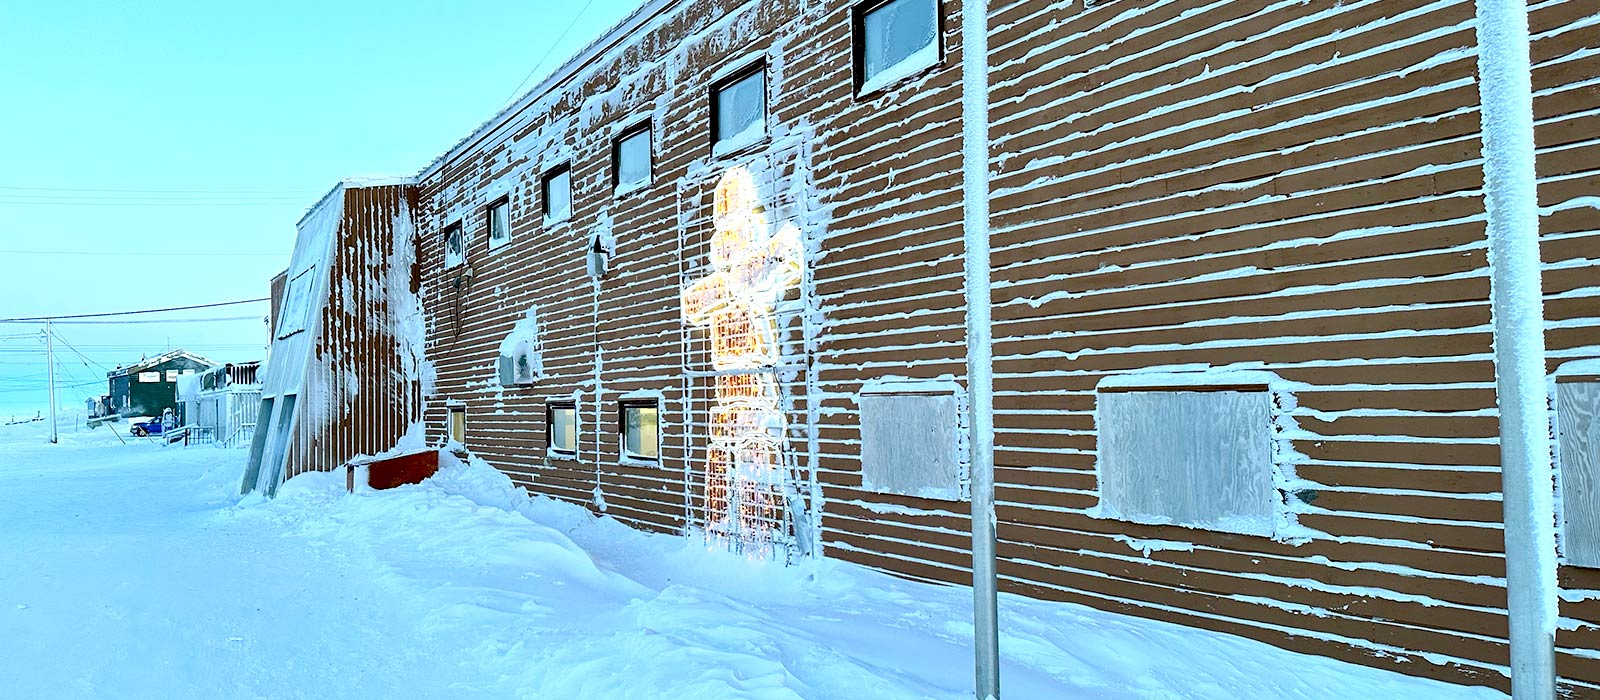 The side of a brick building with snow on the ground.